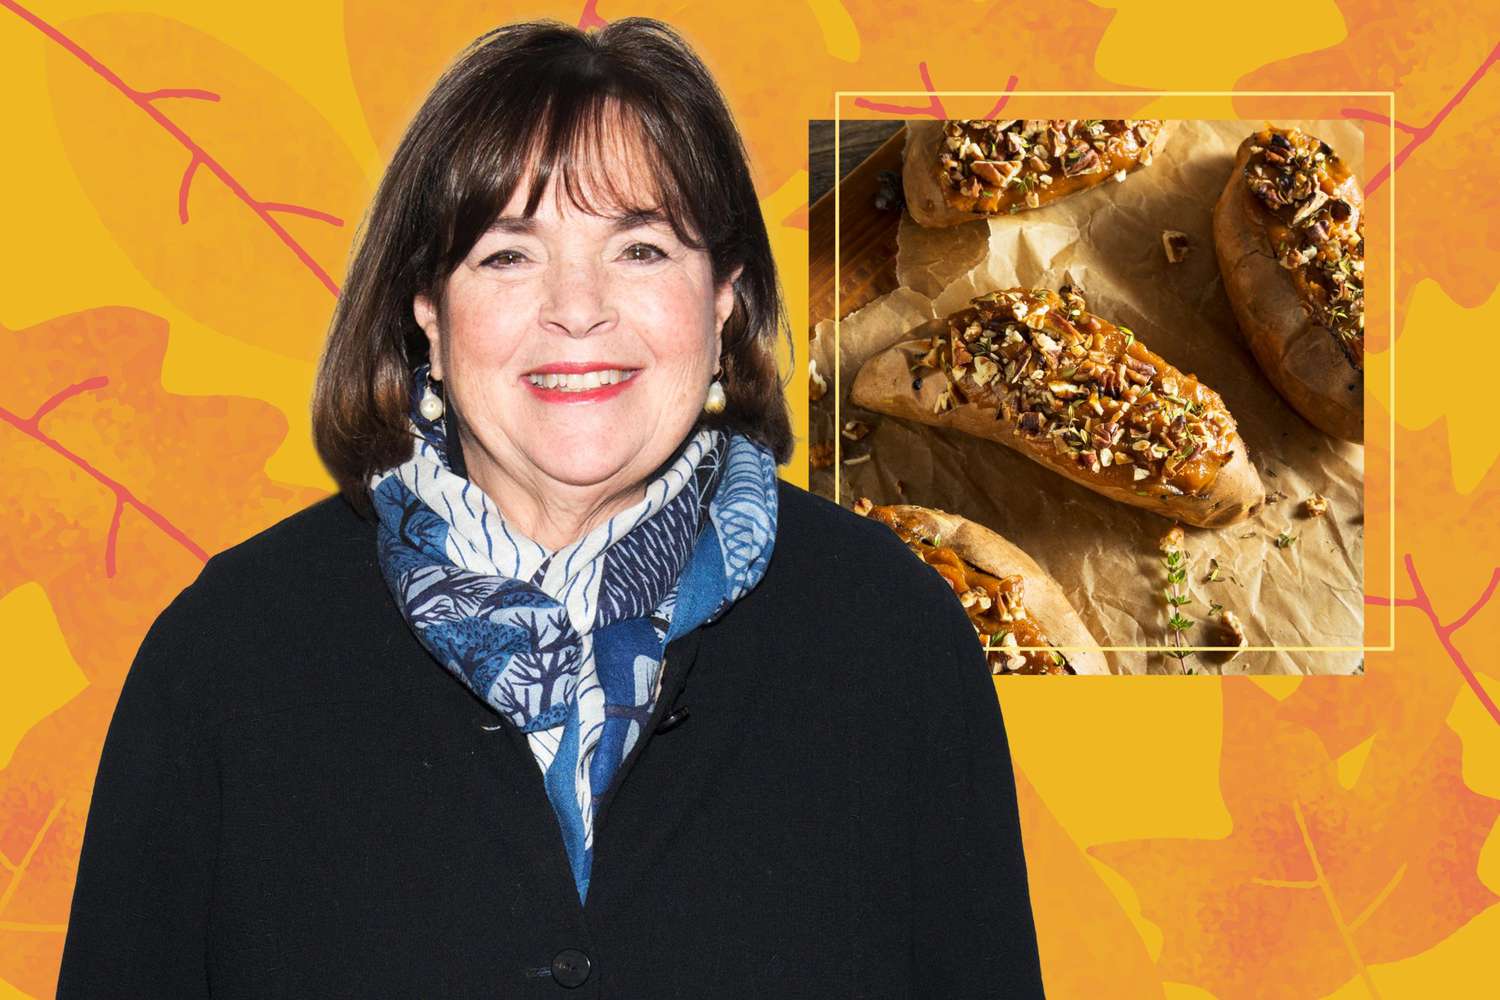 Ina-Garten-Just-Shared-Her-Easy-Make-Ahead-Tip-for-the-Creamiest-Thanksgiving-Sweet-Potatoes-GettyImages-633218798-852285800